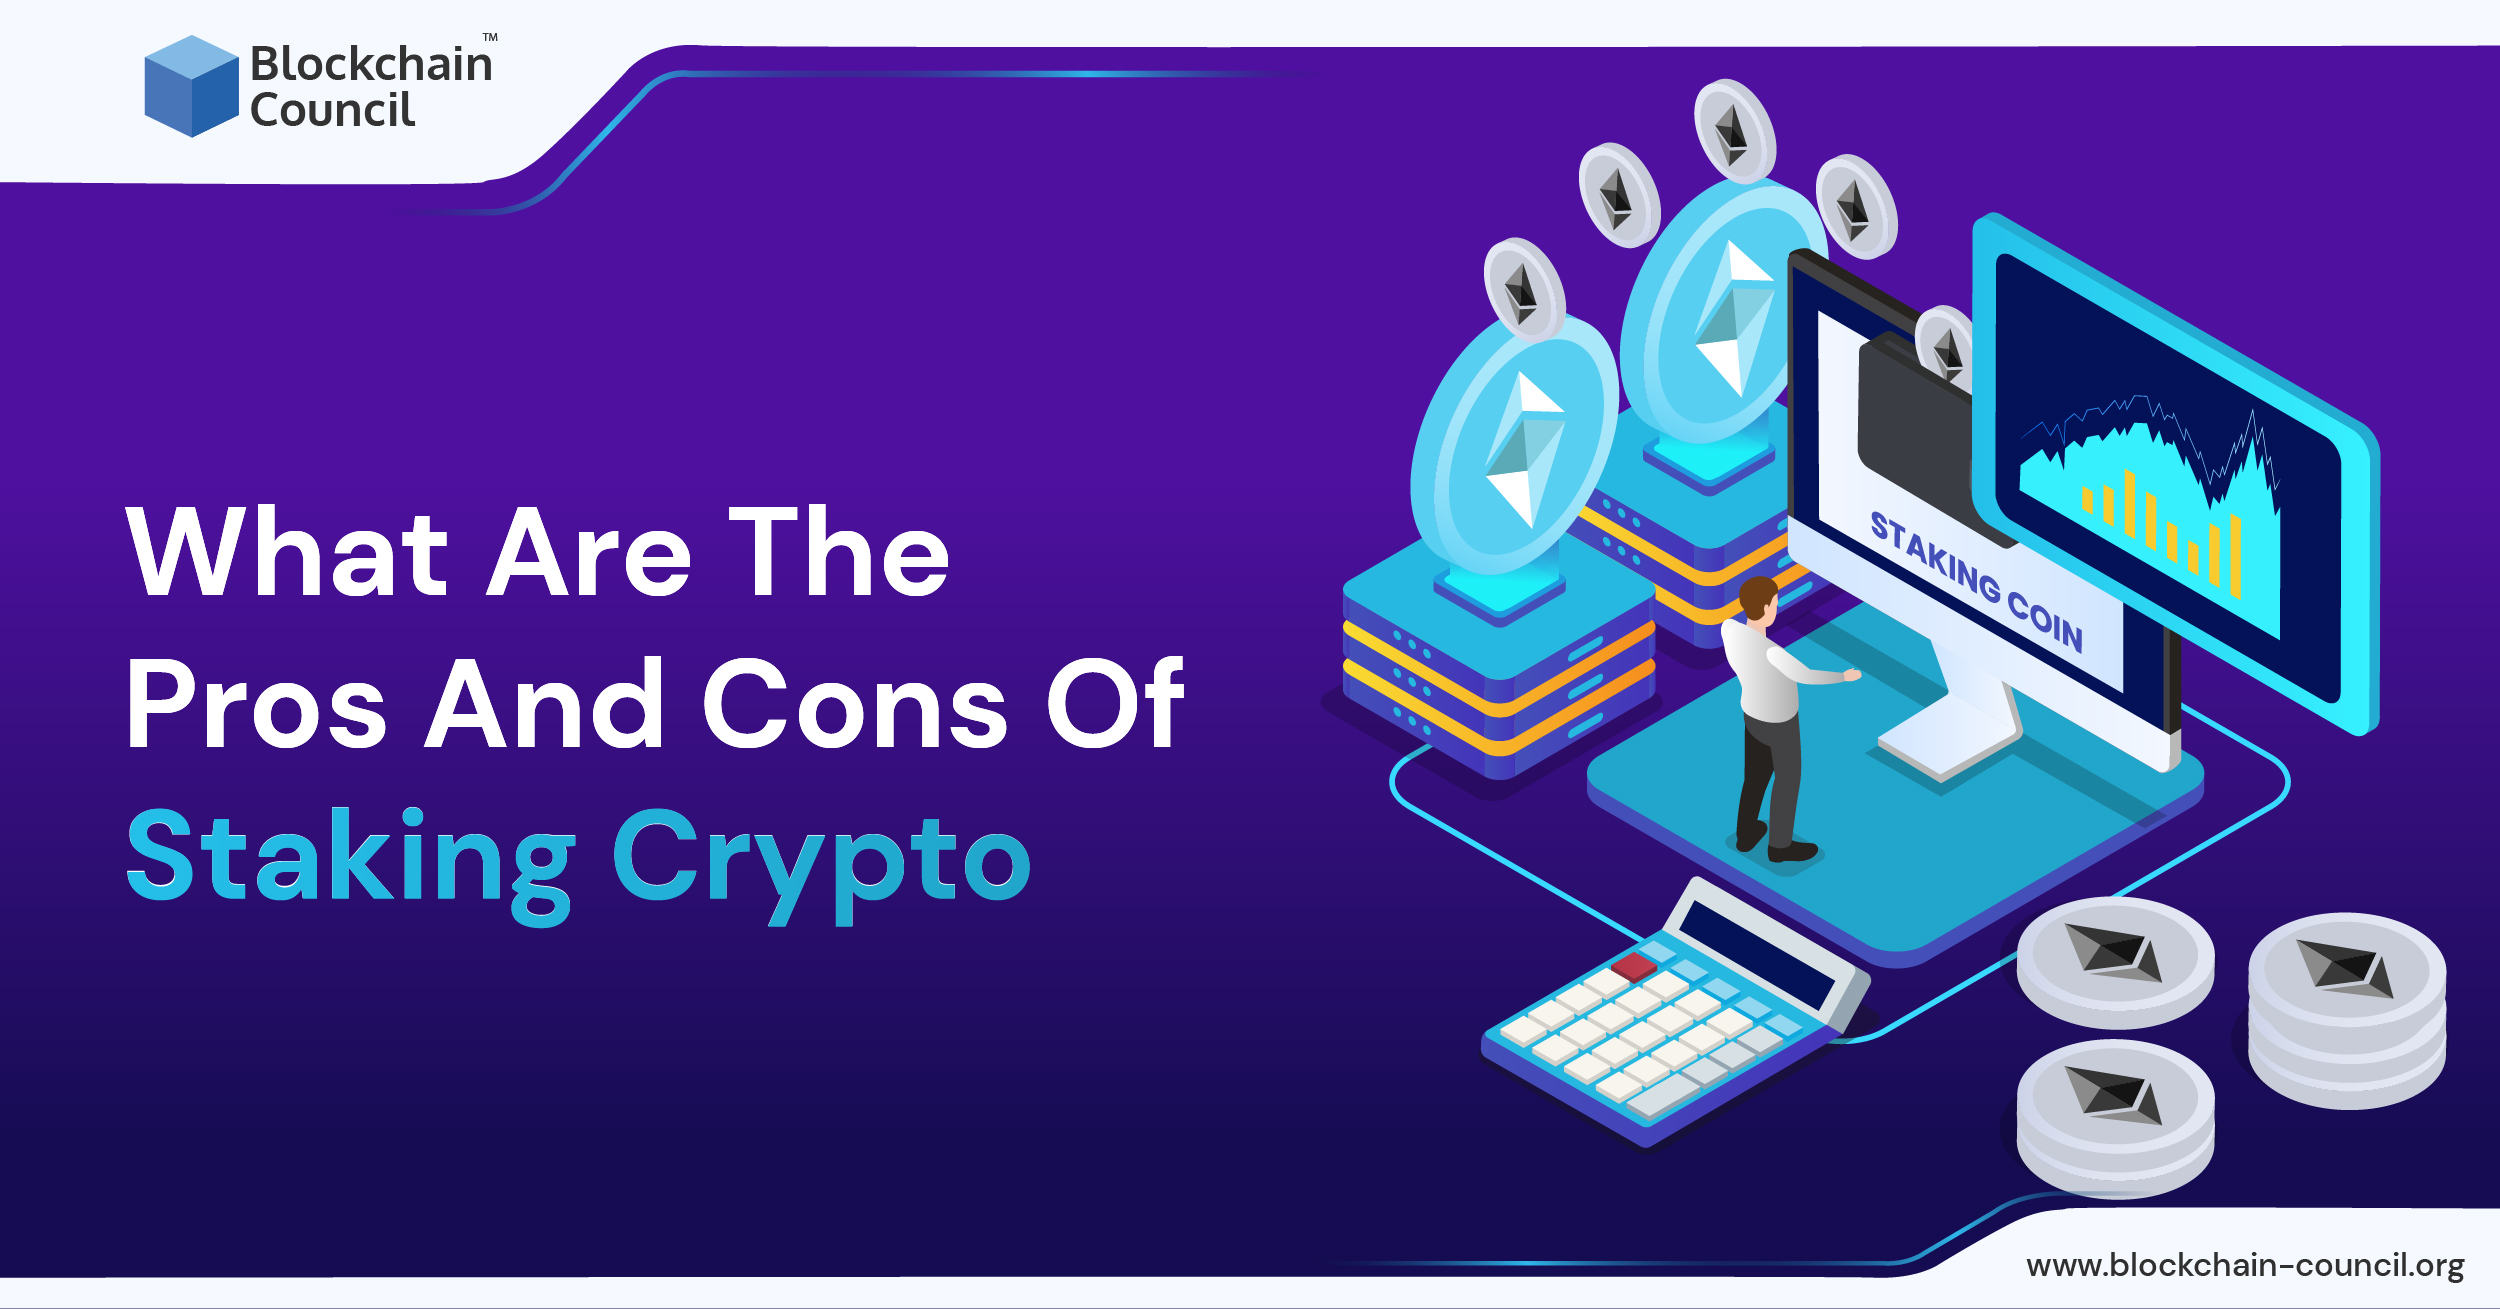 What Are The Pros And Cons Of Staking Crypto